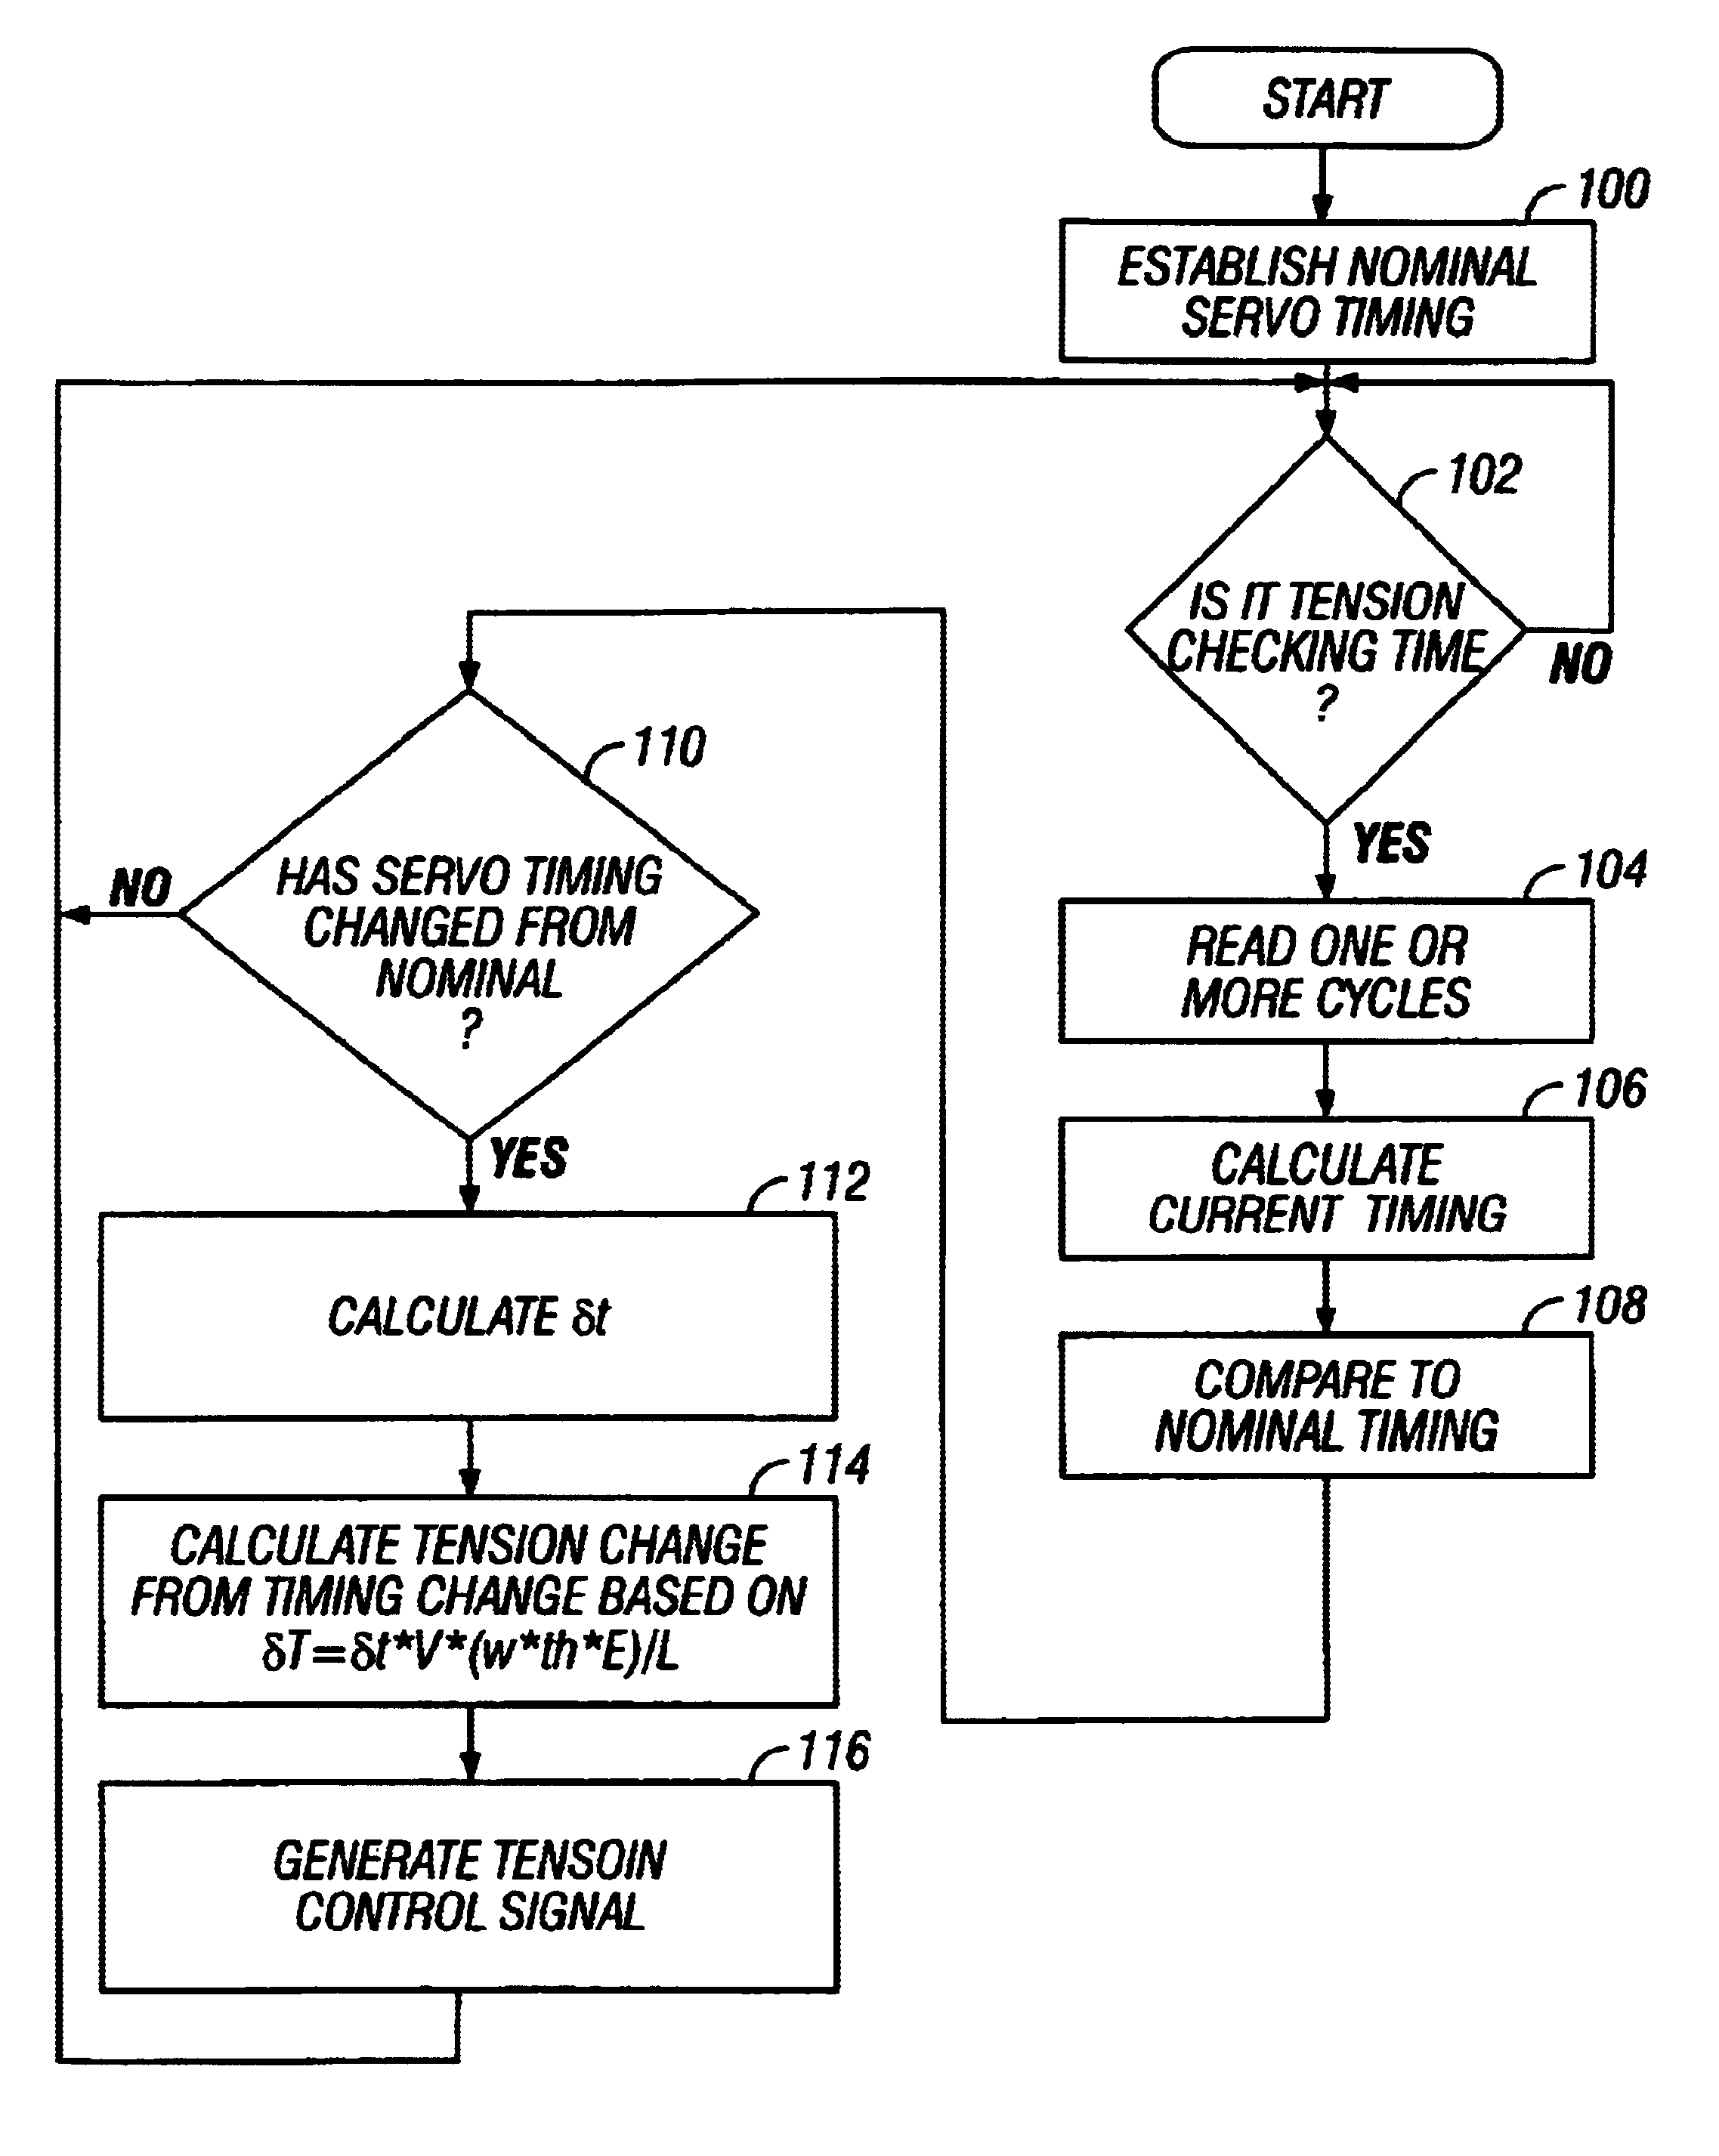 Servo pattern based tape tension control for tape drives